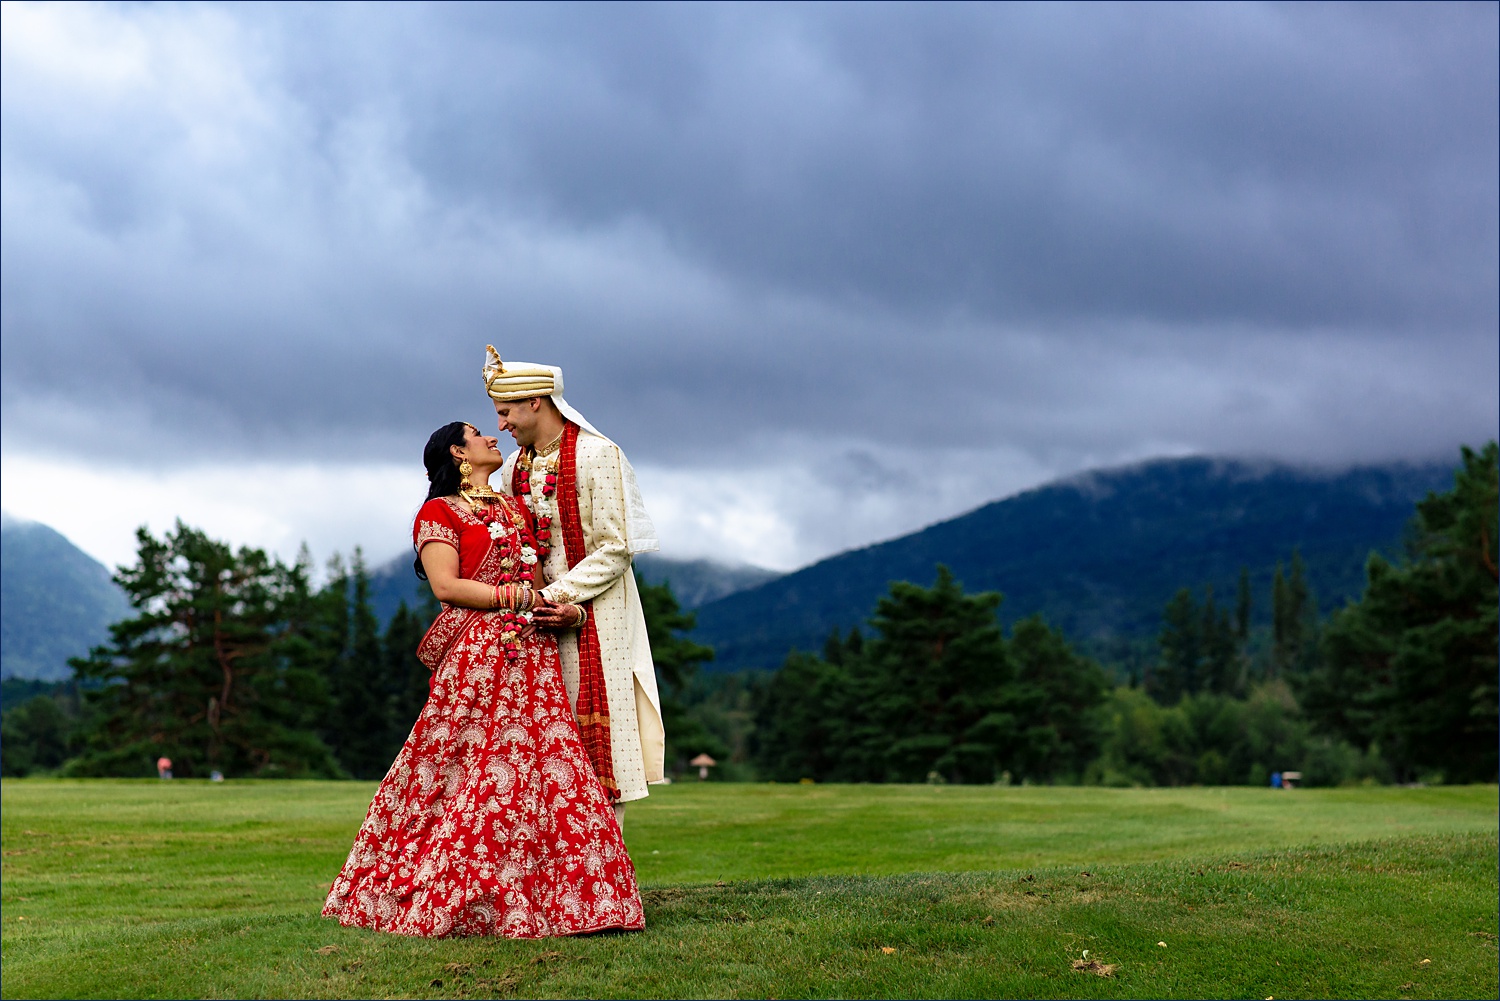 The newlyweds stand together in front of the White Mountains on their wedding day